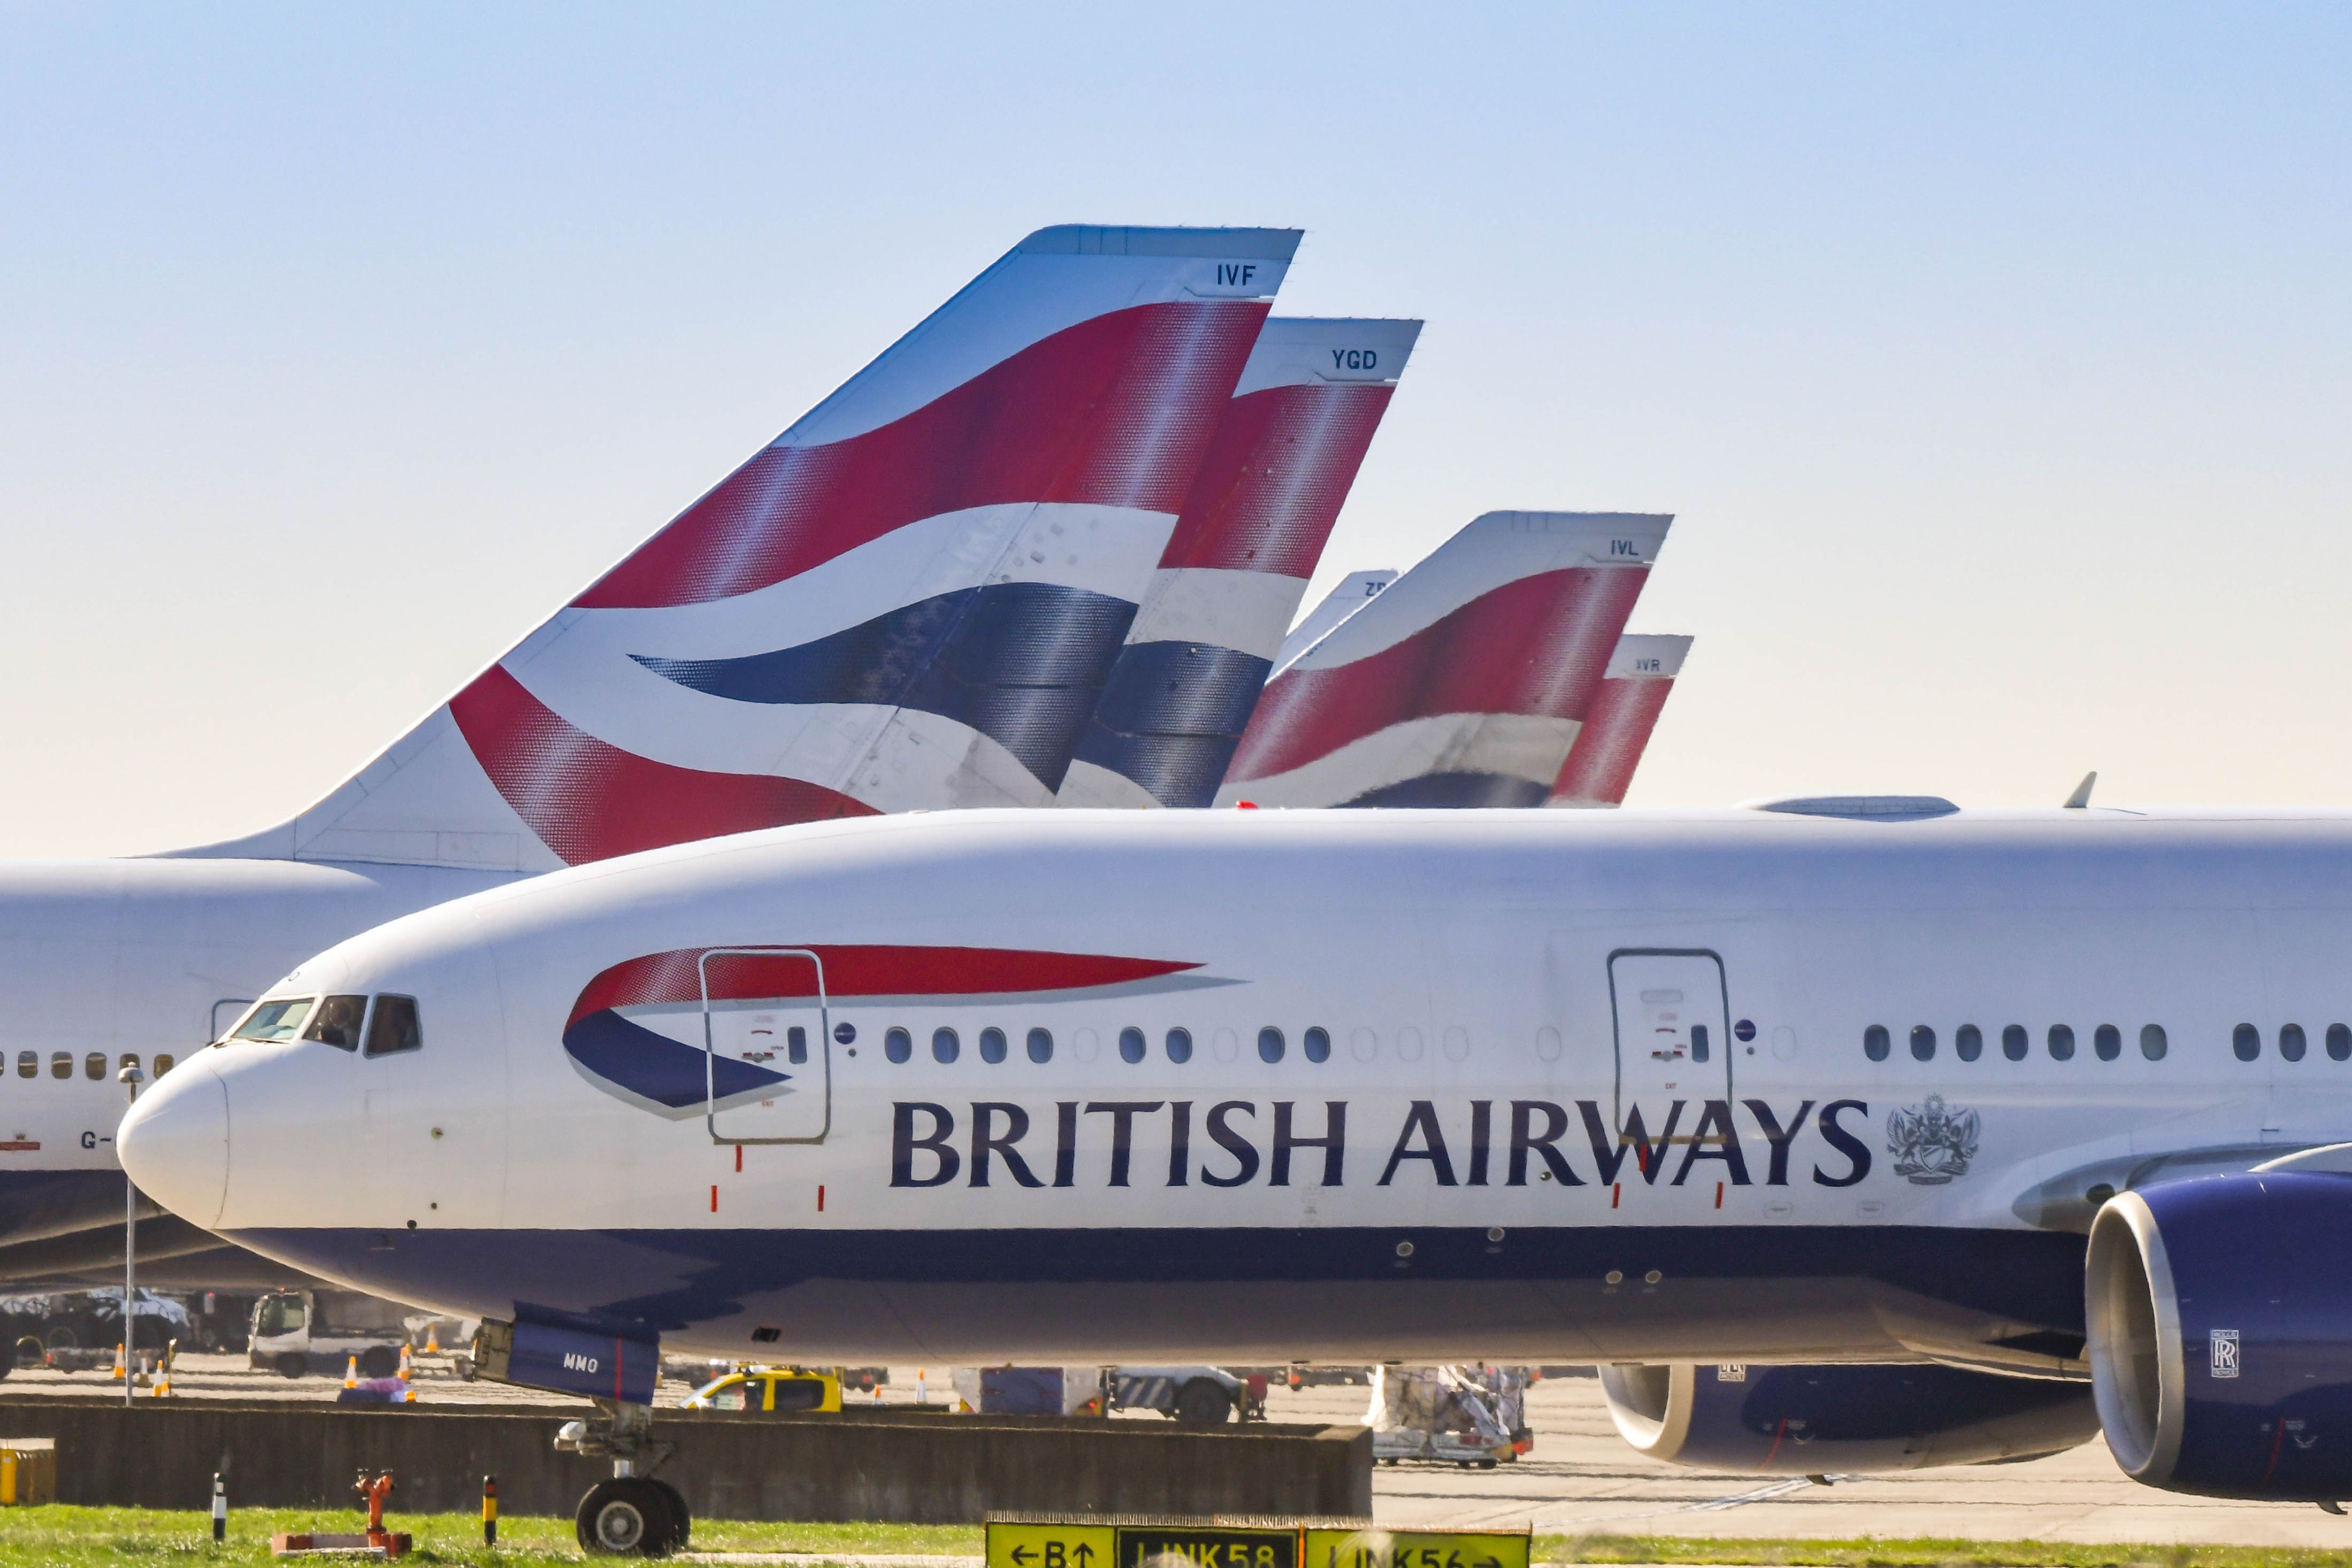 Boeing 777 long haul airliner operated by British Airways taxiing for take off at London Heathrow Airport past tail fins of the company's other aircraft.